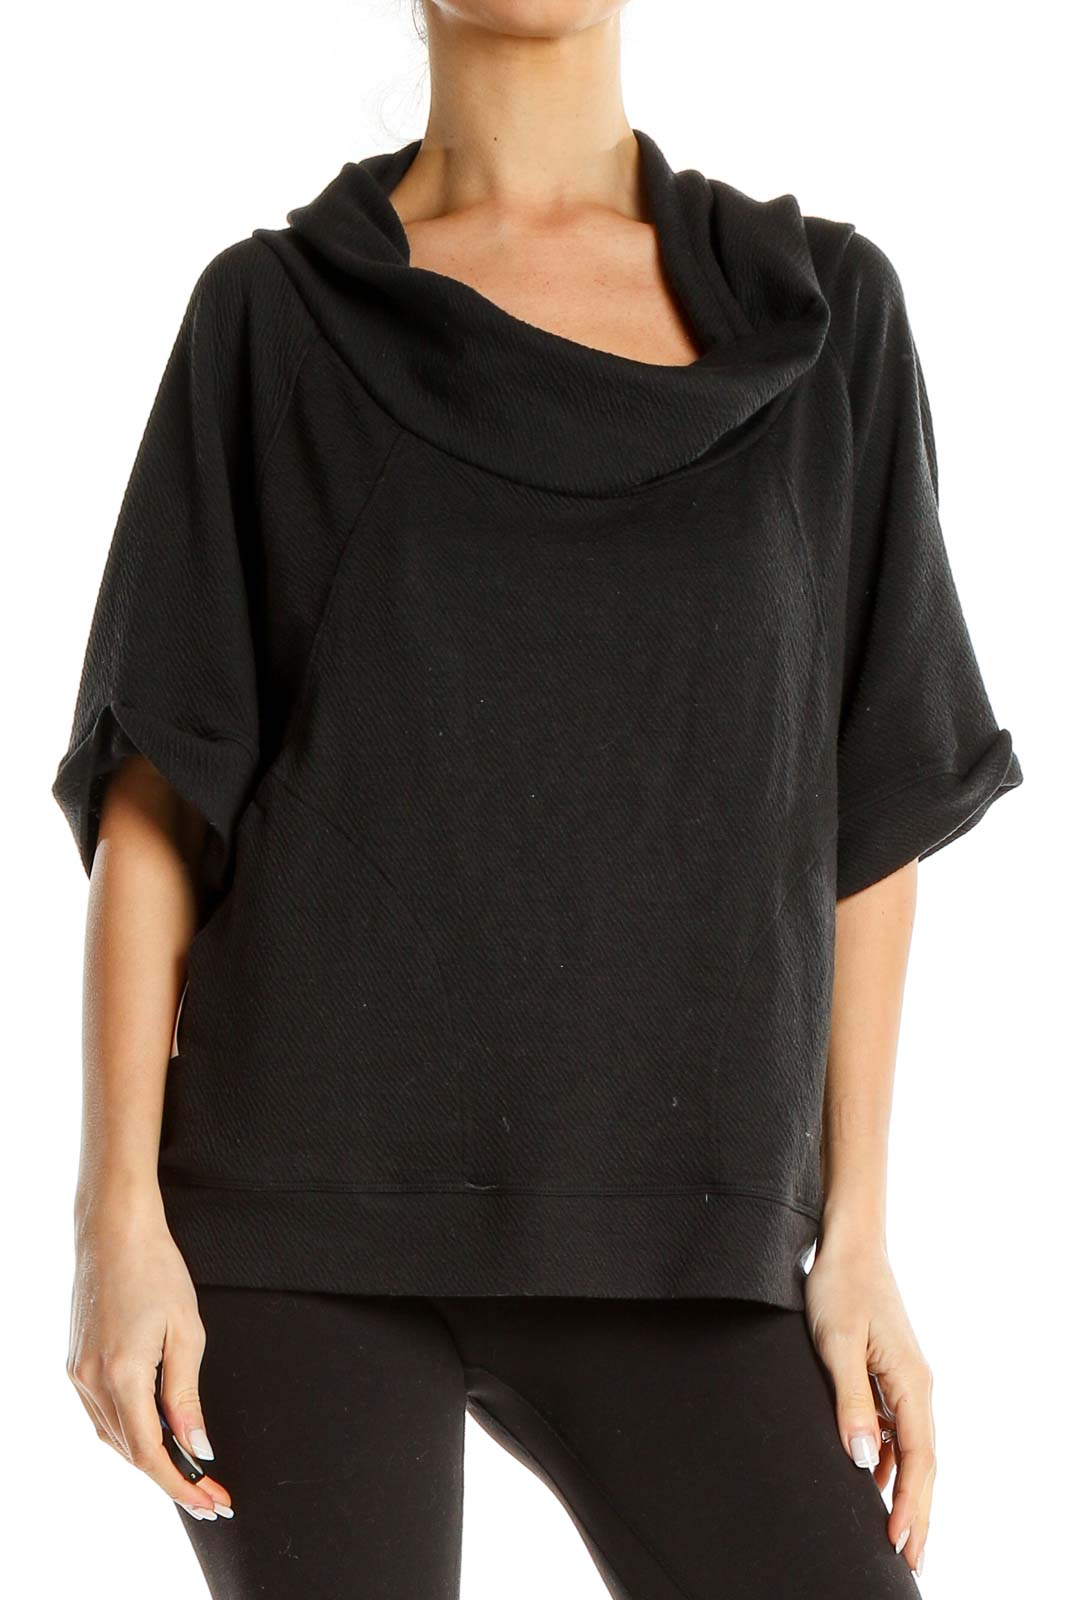 Black Cowl Neck Short Sleeve Sweater Front